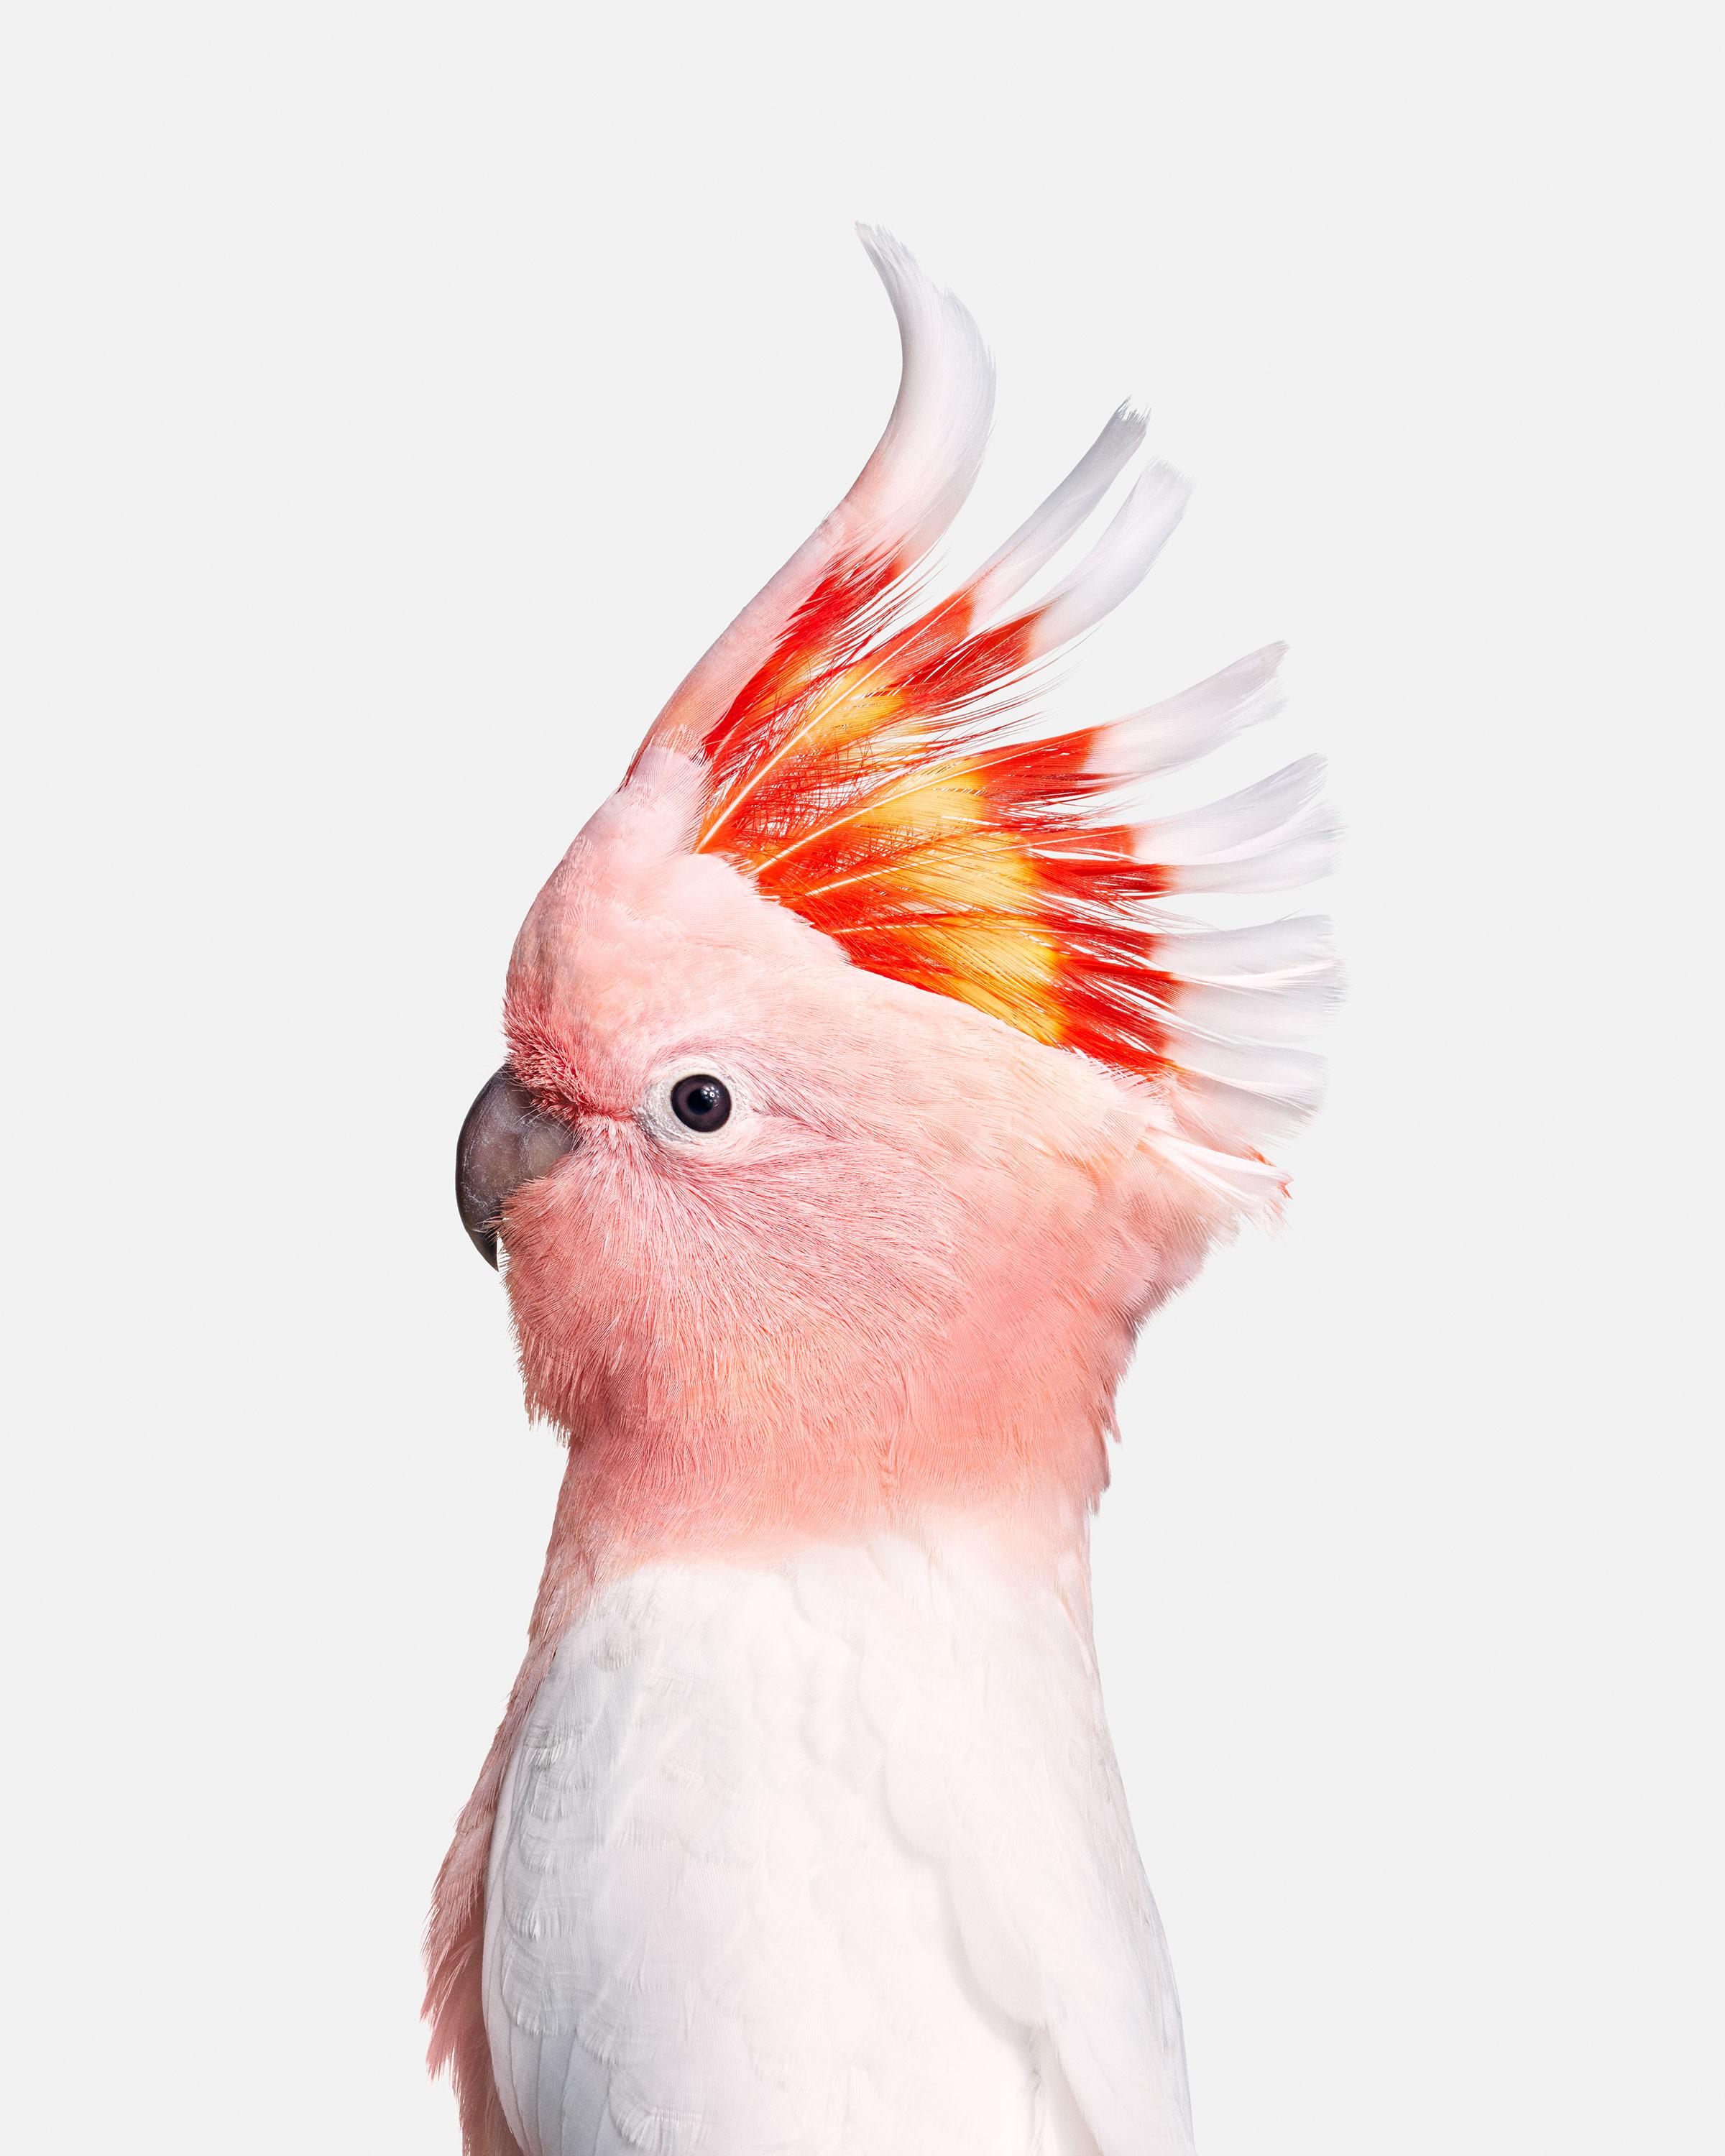 Randal Ford - Pink Cockatoo, Photography 2018, Printed After